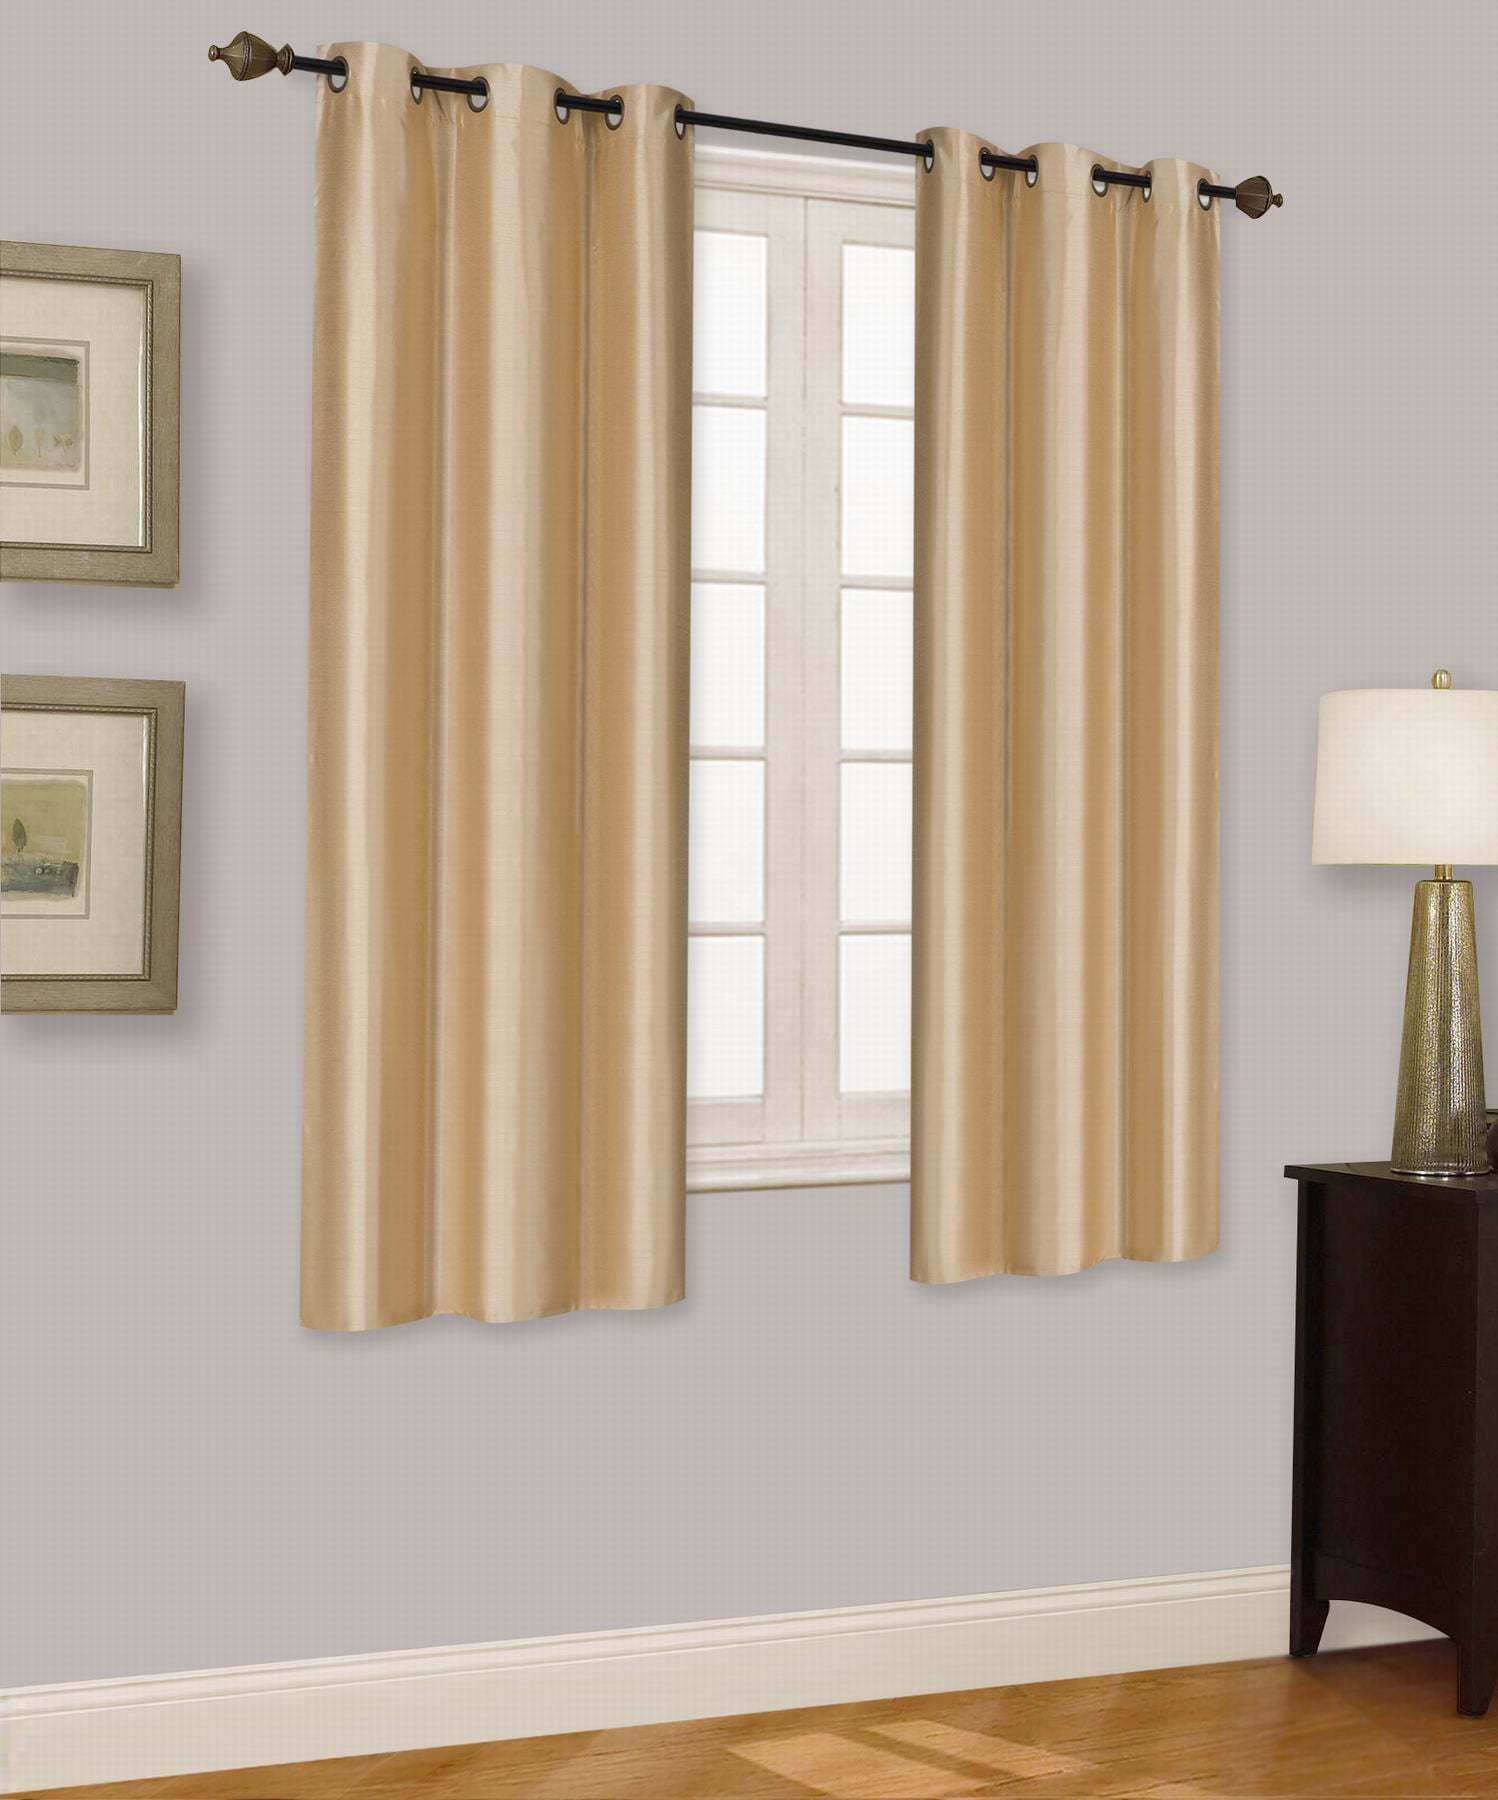 NEW 2PC 100% THERMAL BLACKOUT PANELS WINDOW CURTAIN ASSORTED COLORS ELIO GOLD 